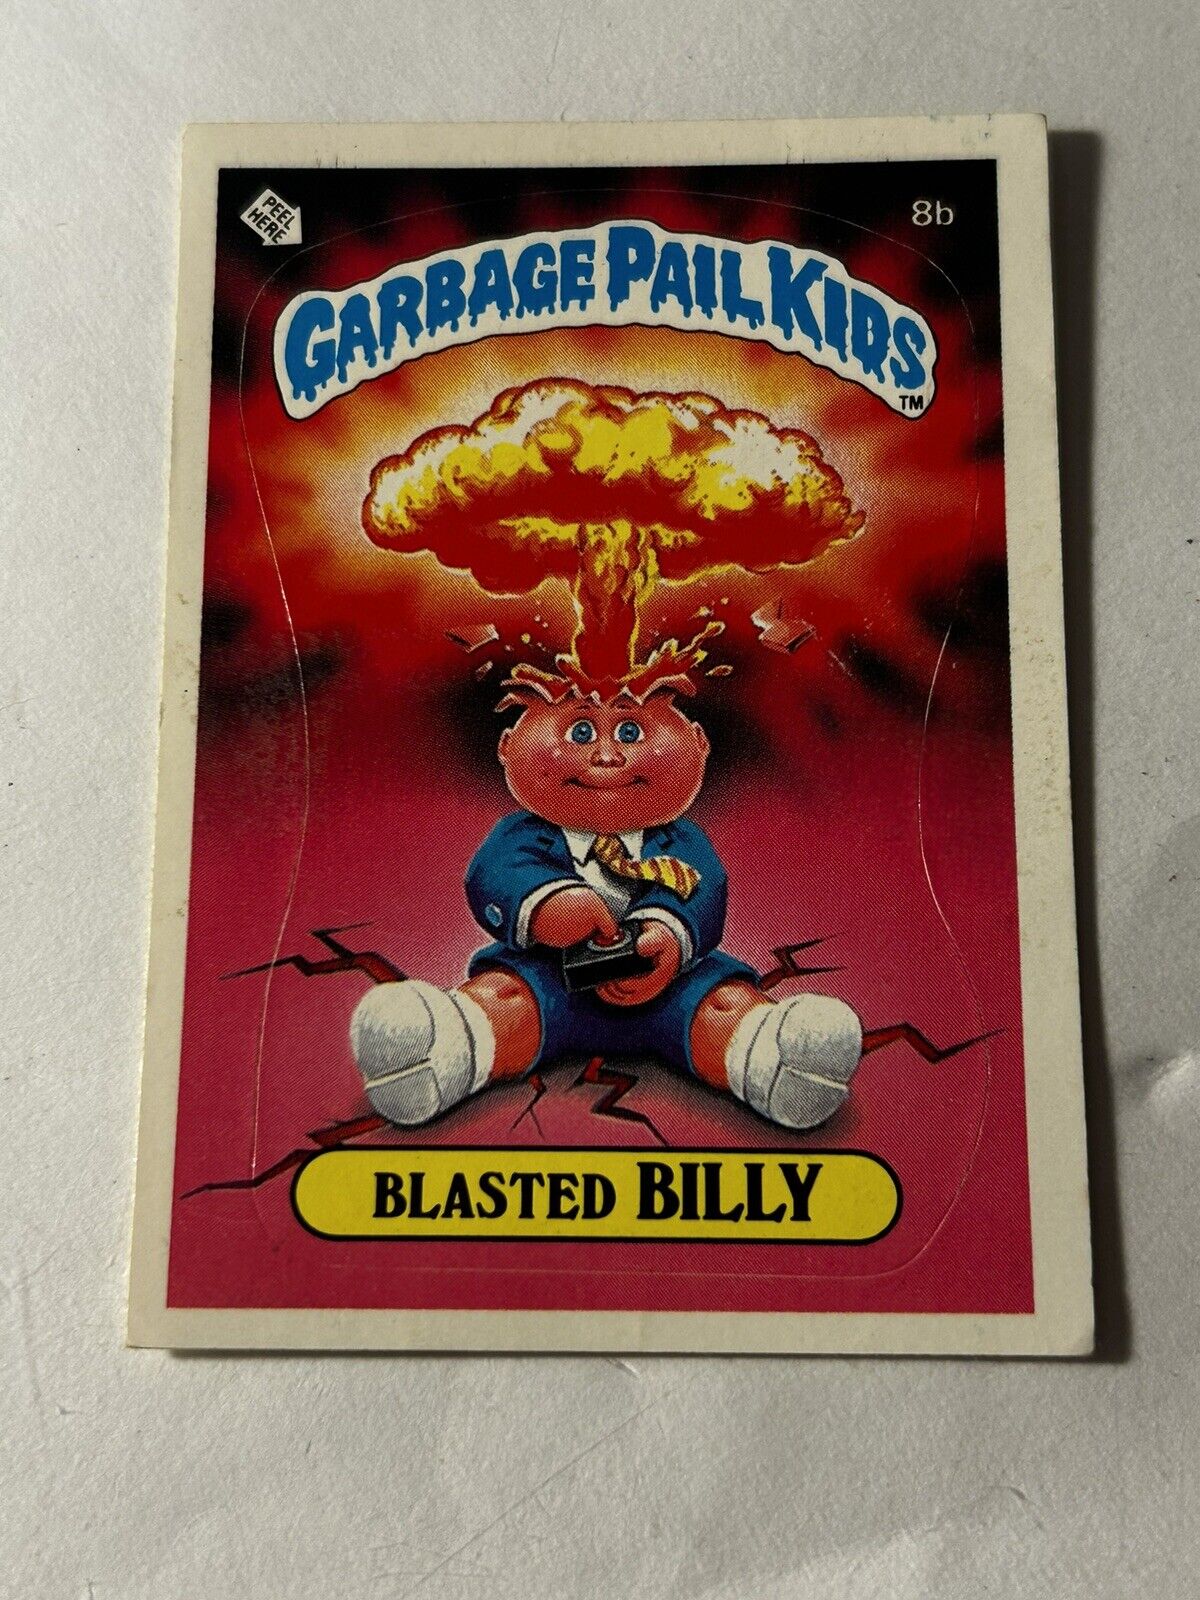 1985 Topps Garbage Pail Kids Series 1 Matte Blasted Billy Cheaters License